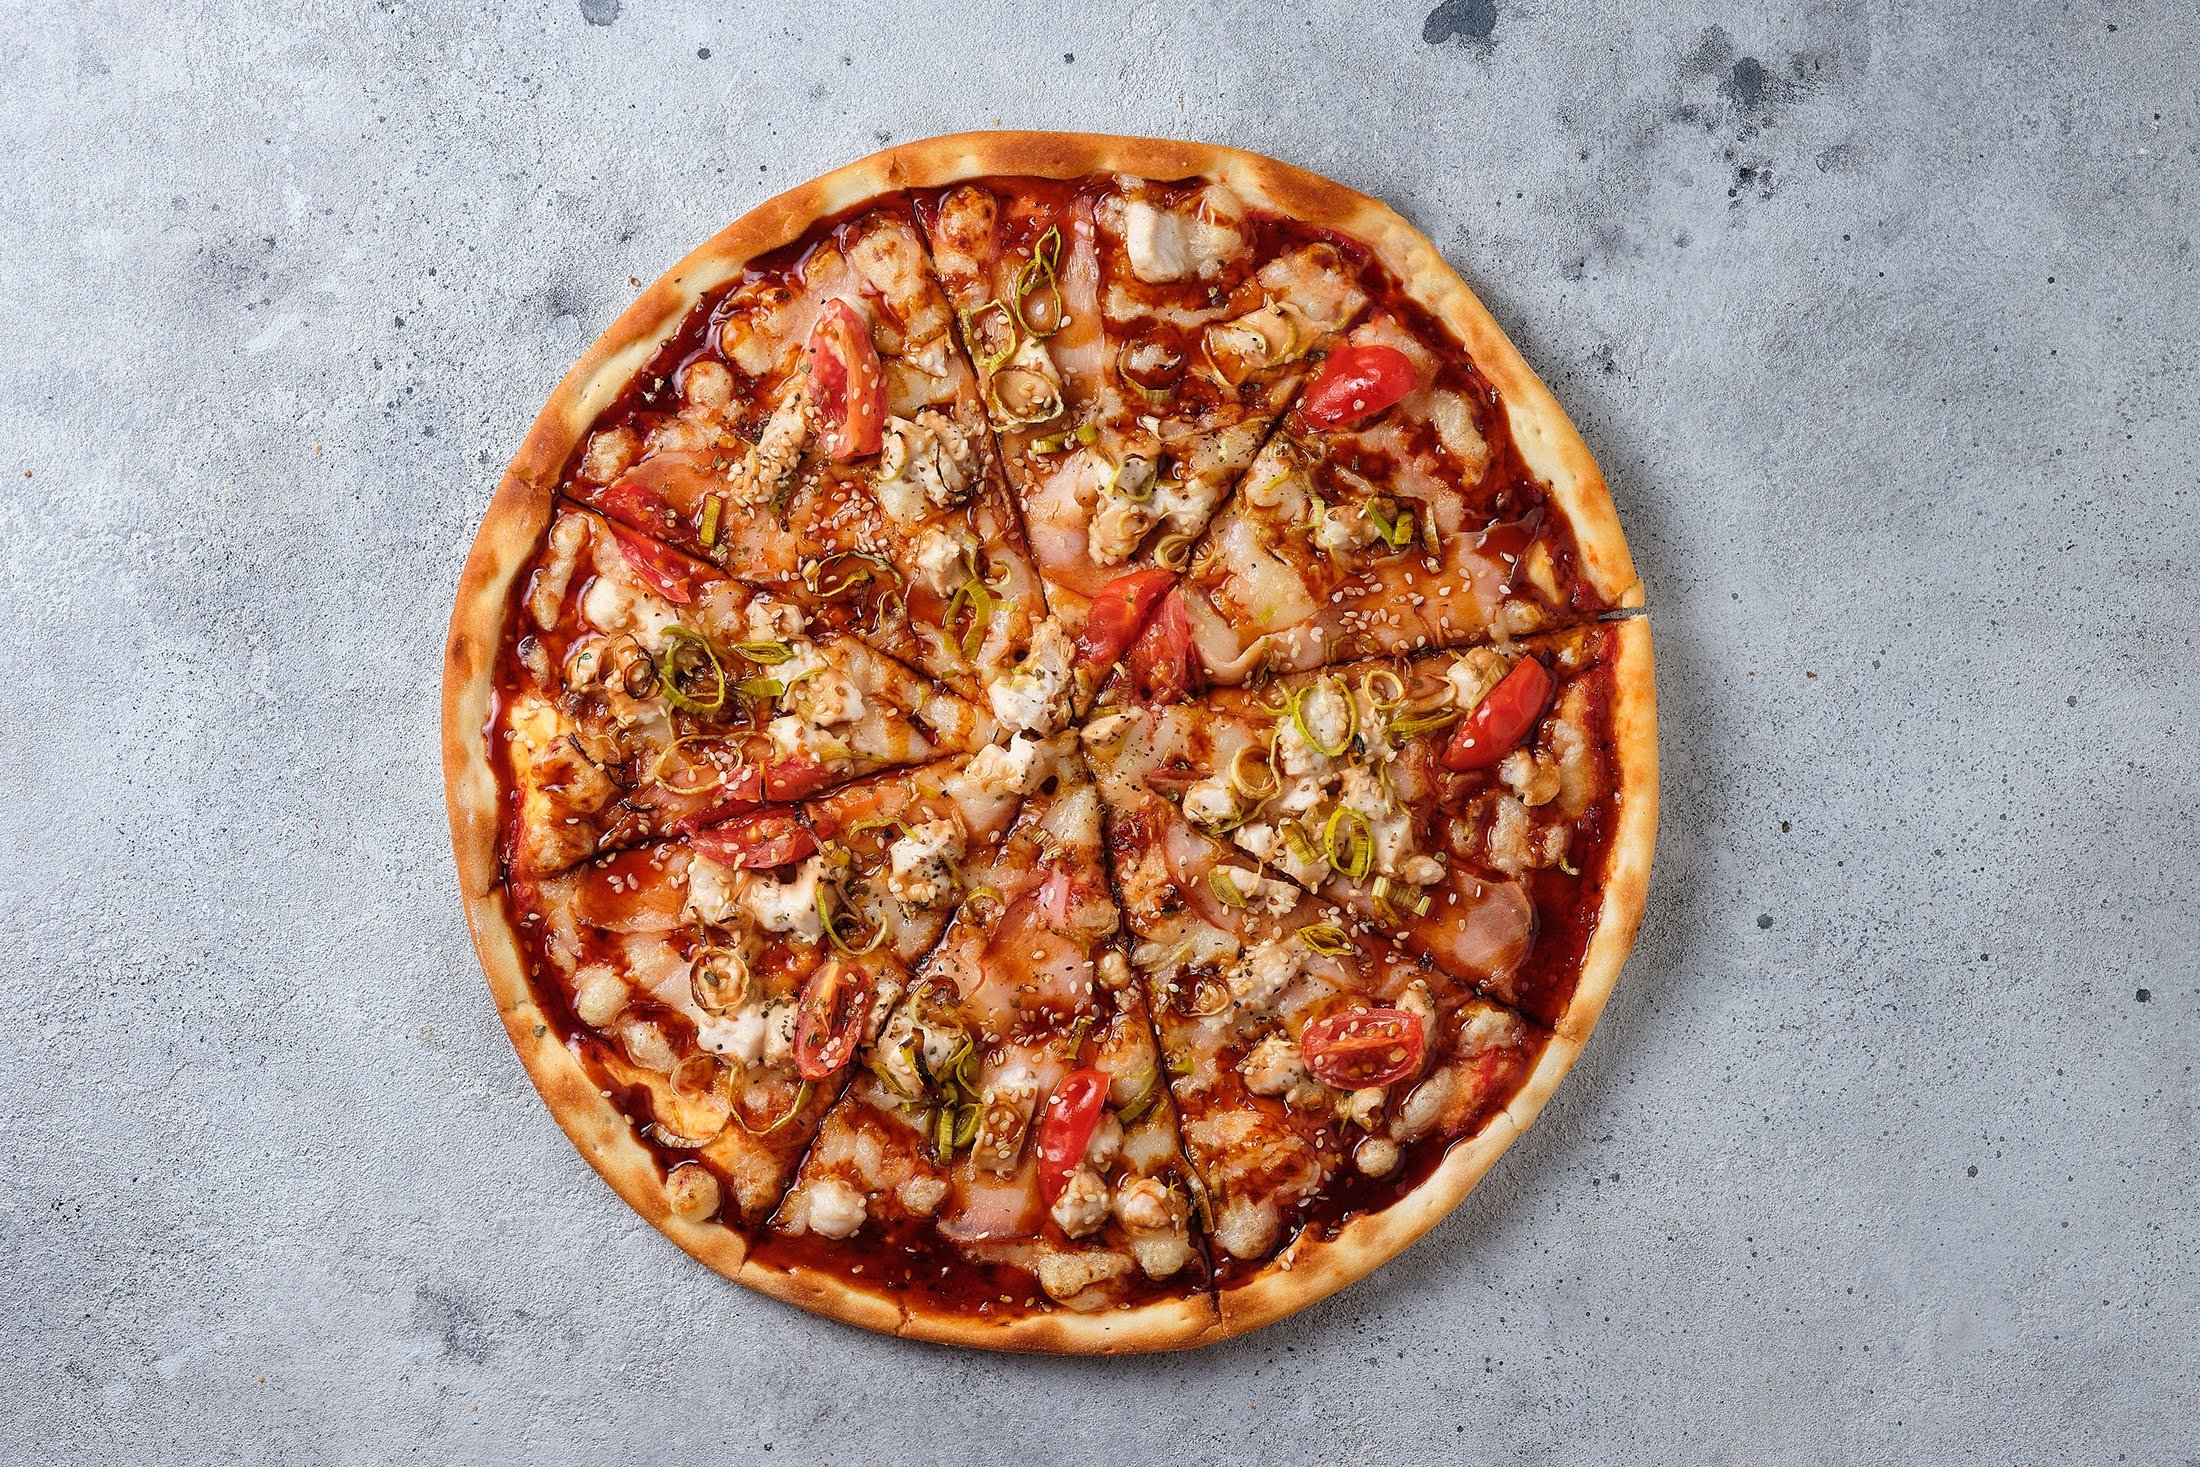 Teriyaki or barbecue chicken pizza is a crowd favorite. (Shutterstock Photo)